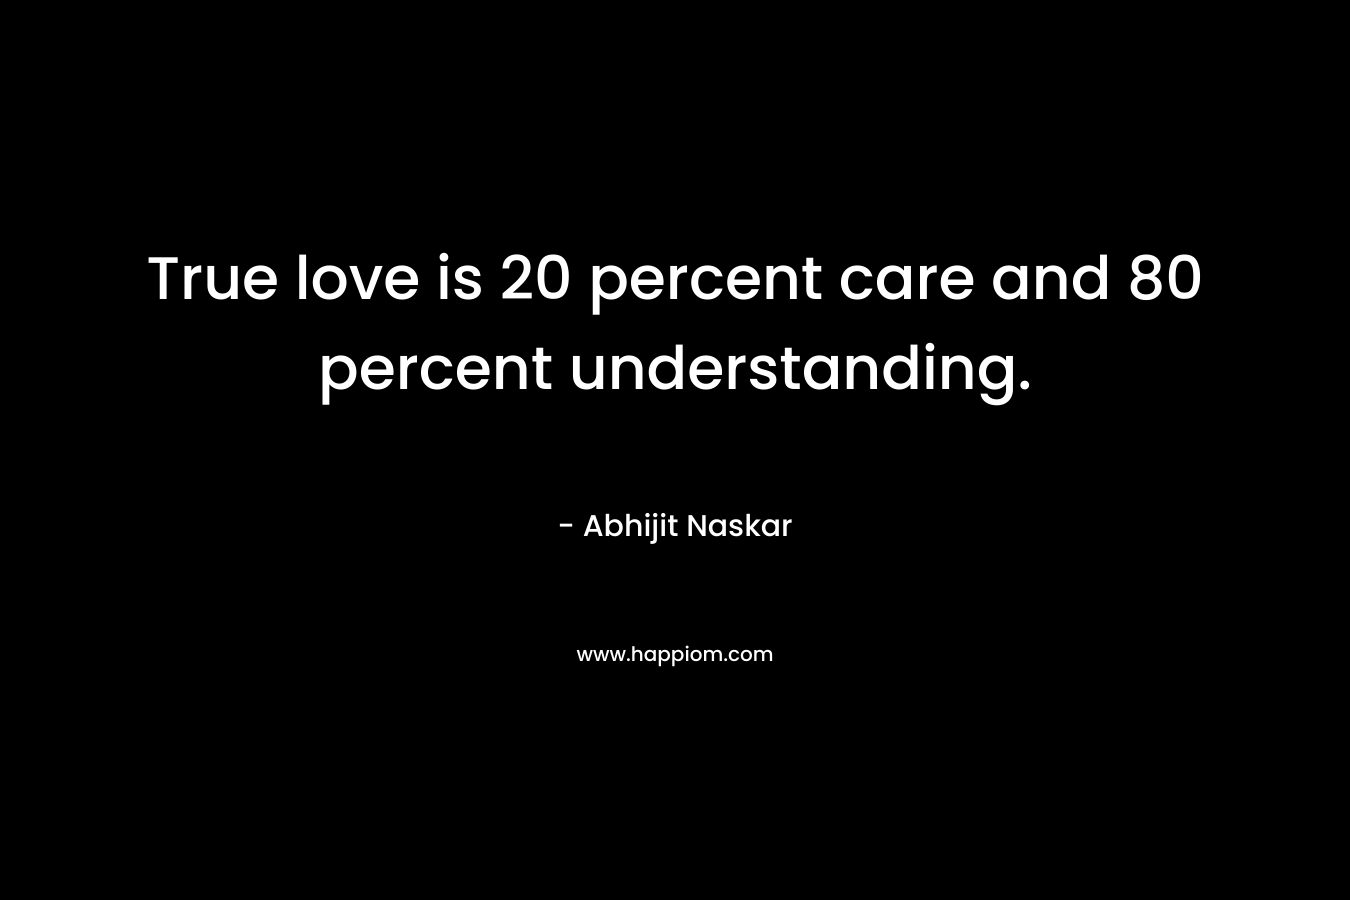 True love is 20 percent care and 80 percent understanding.